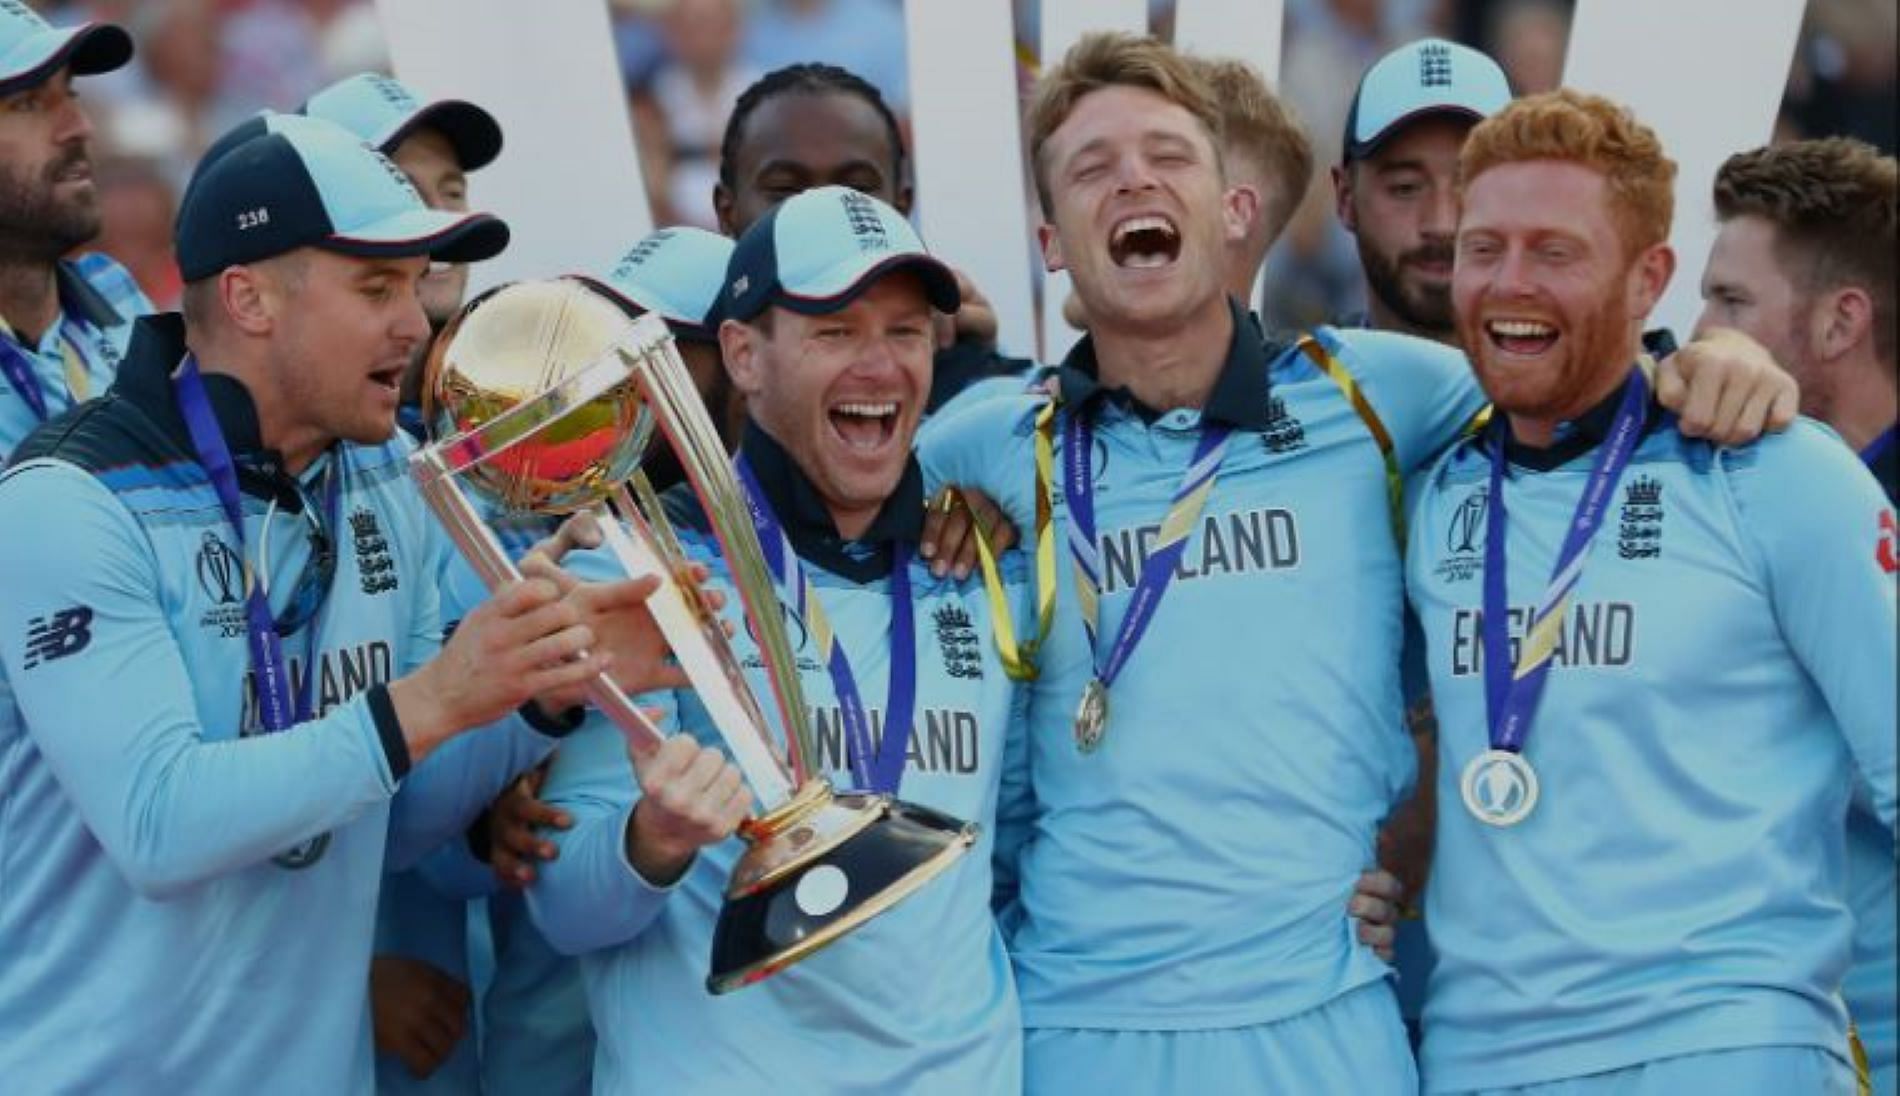 England celebrated their first ODI World Cup title in 2019.